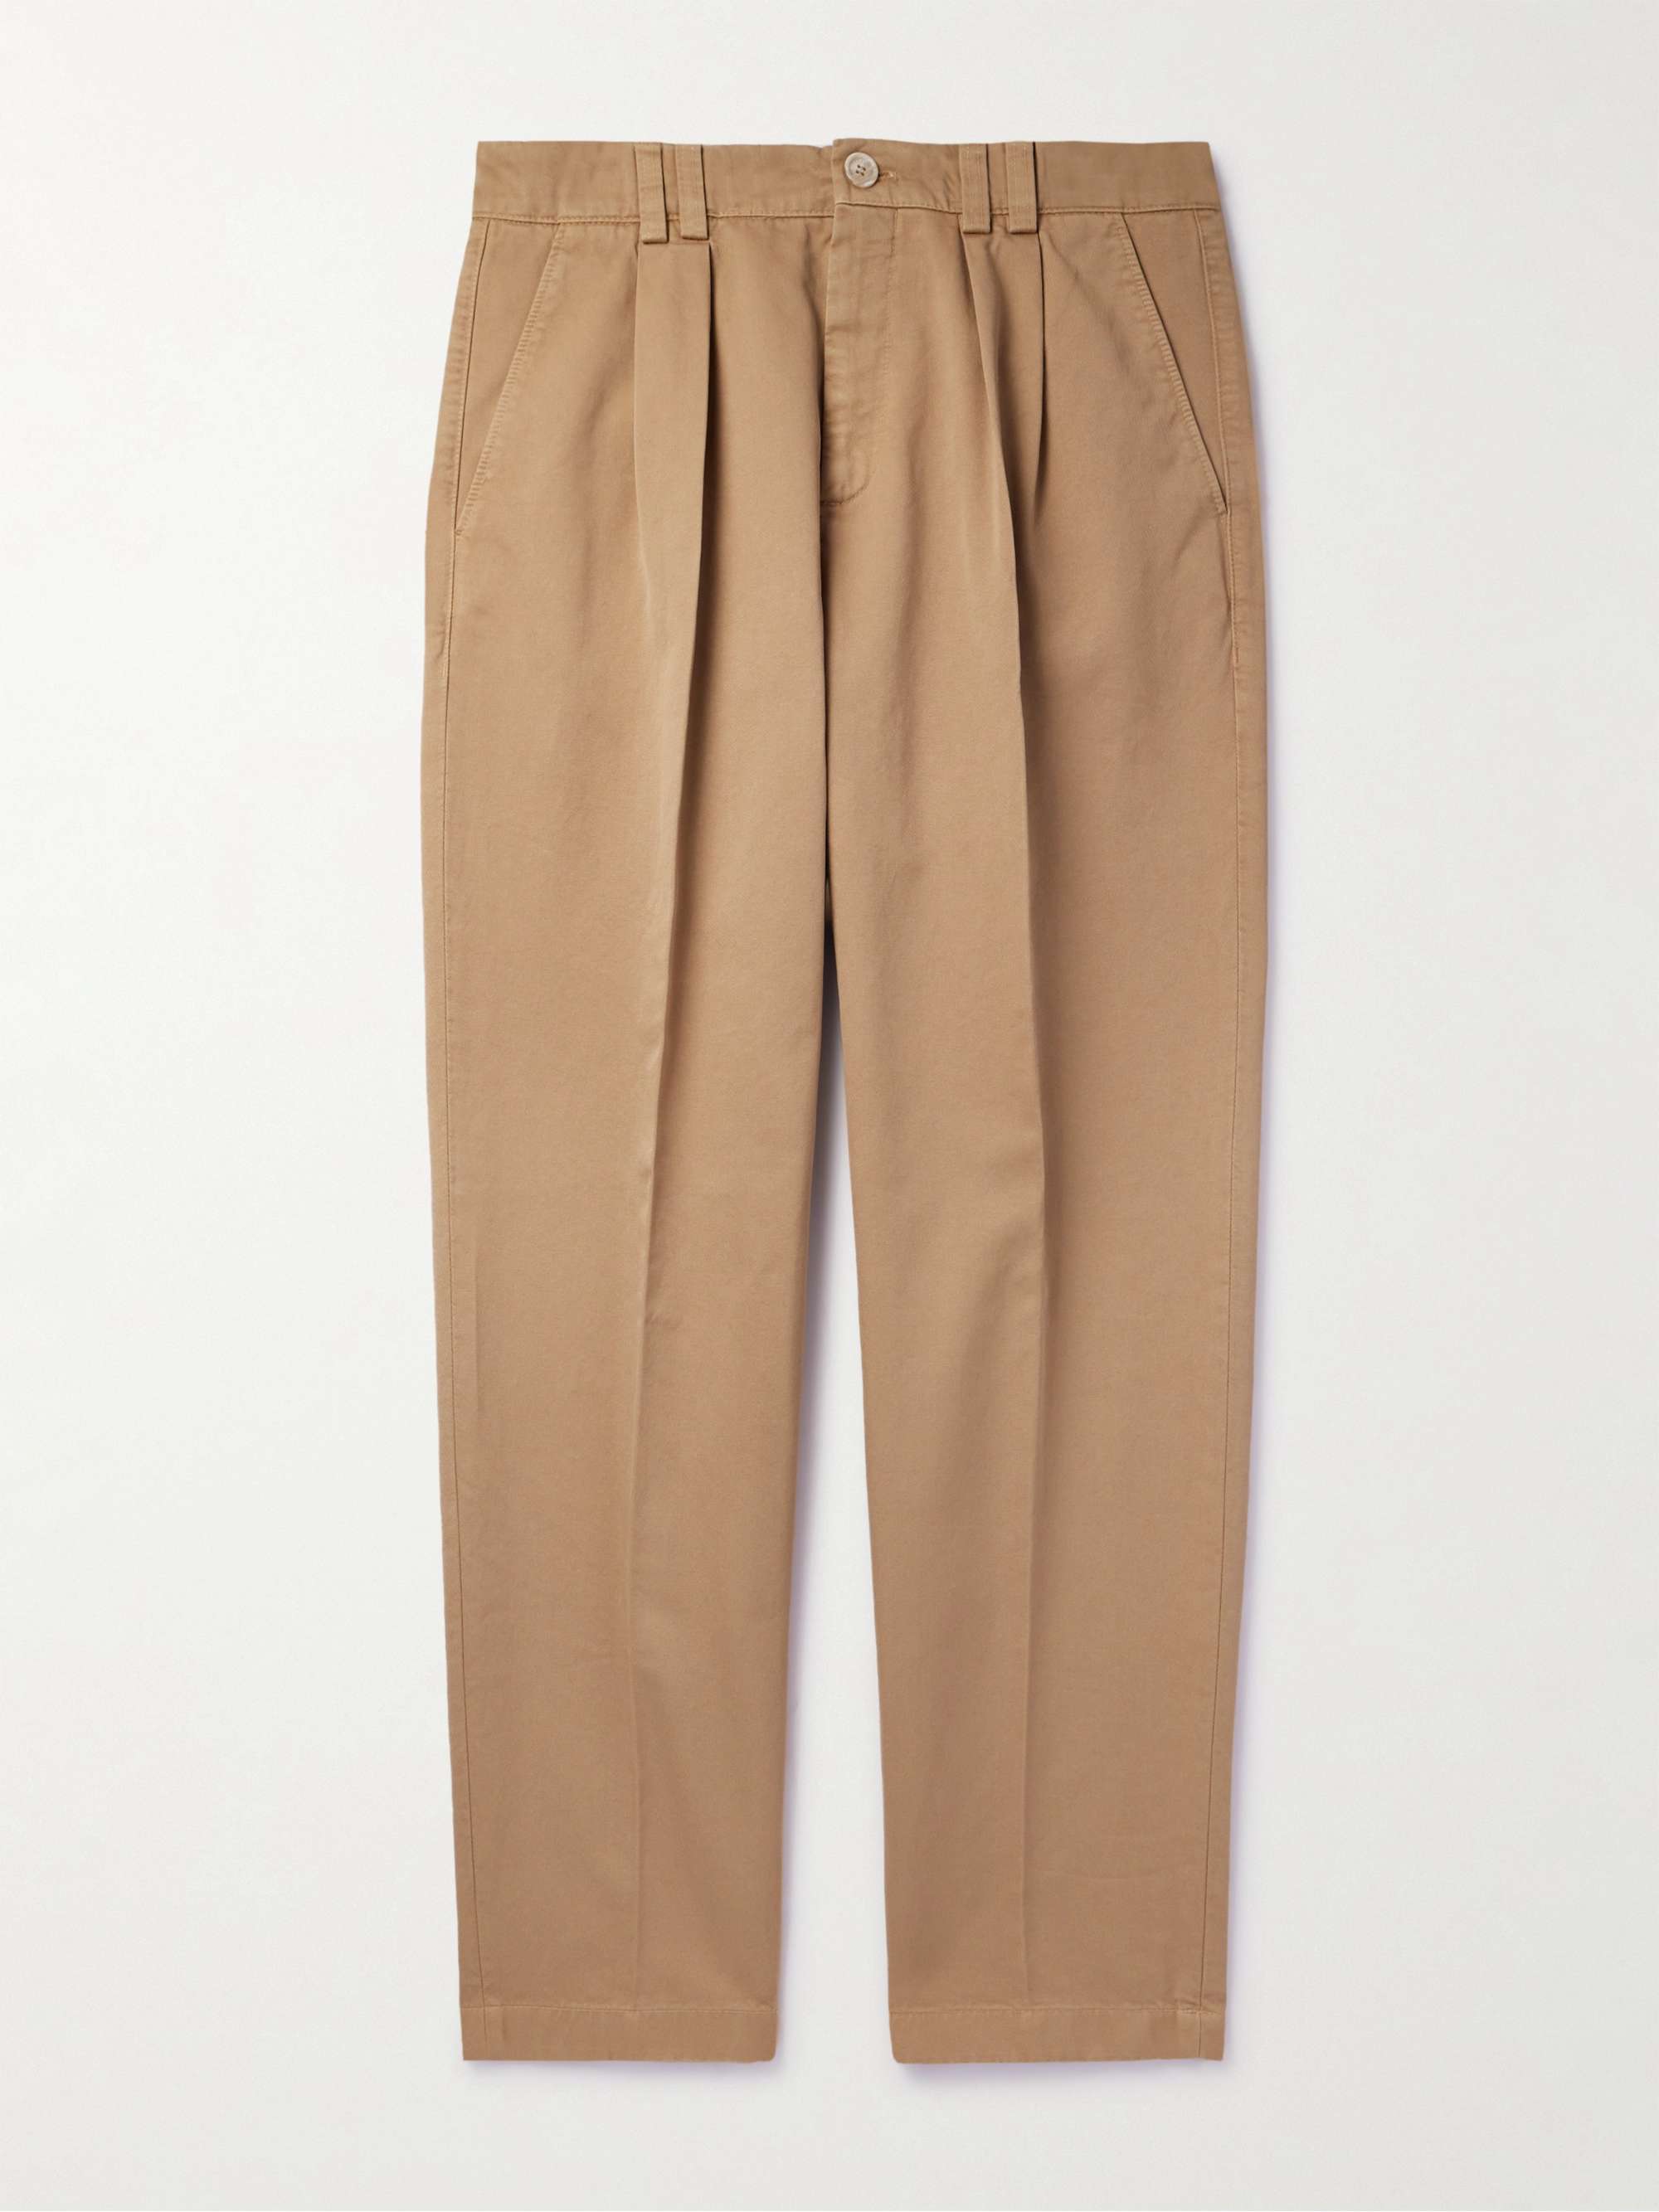 Womens Brunello Cucinelli brown Suede Relaxed Trousers